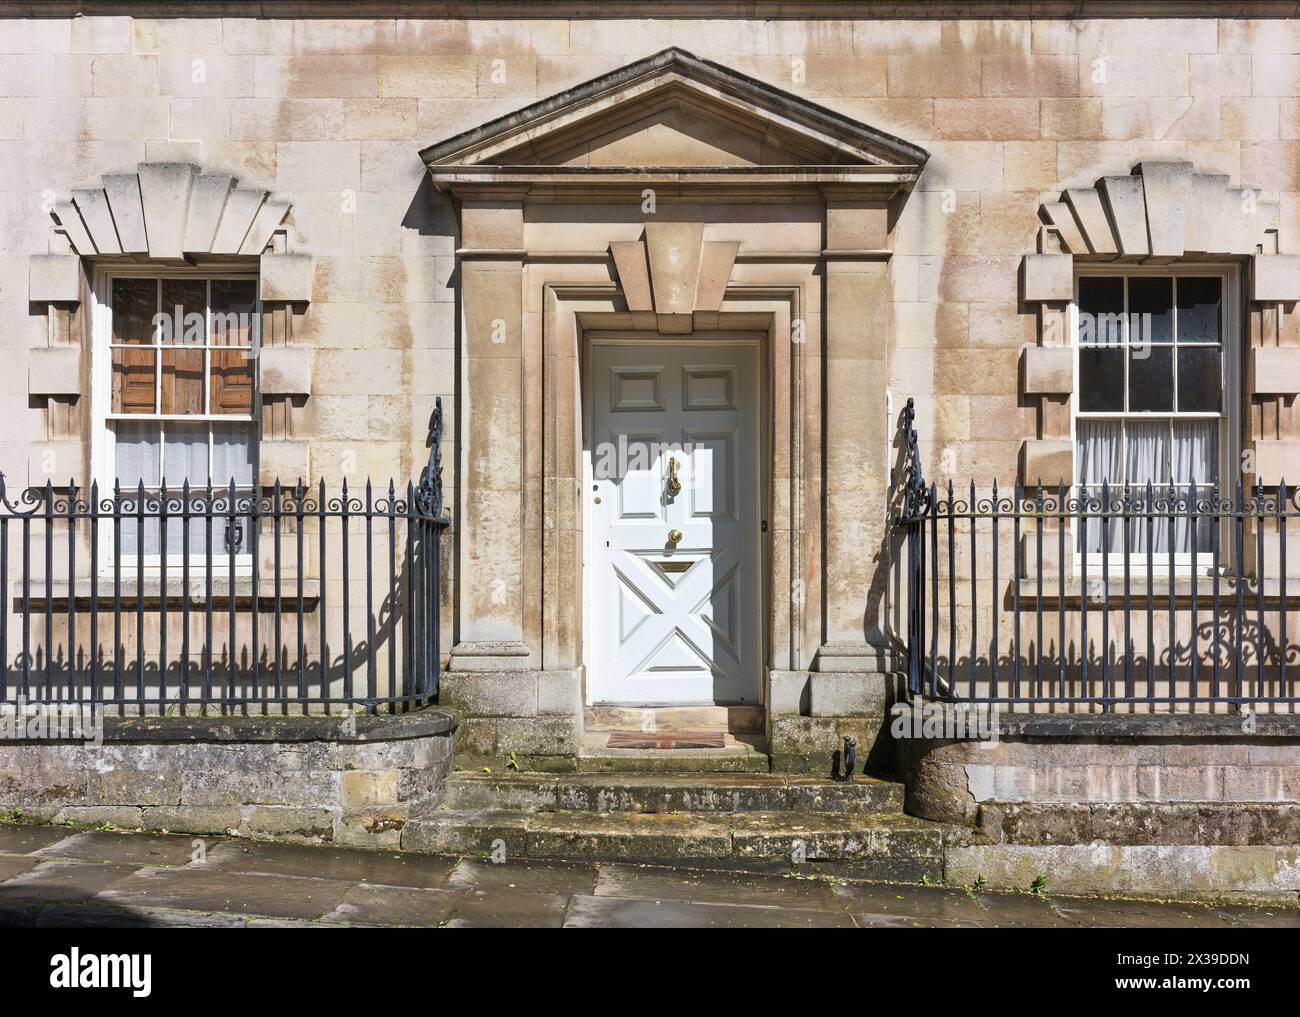 Elaborate door entrance of a neo-classical building at Stamford, England. Stock Photo